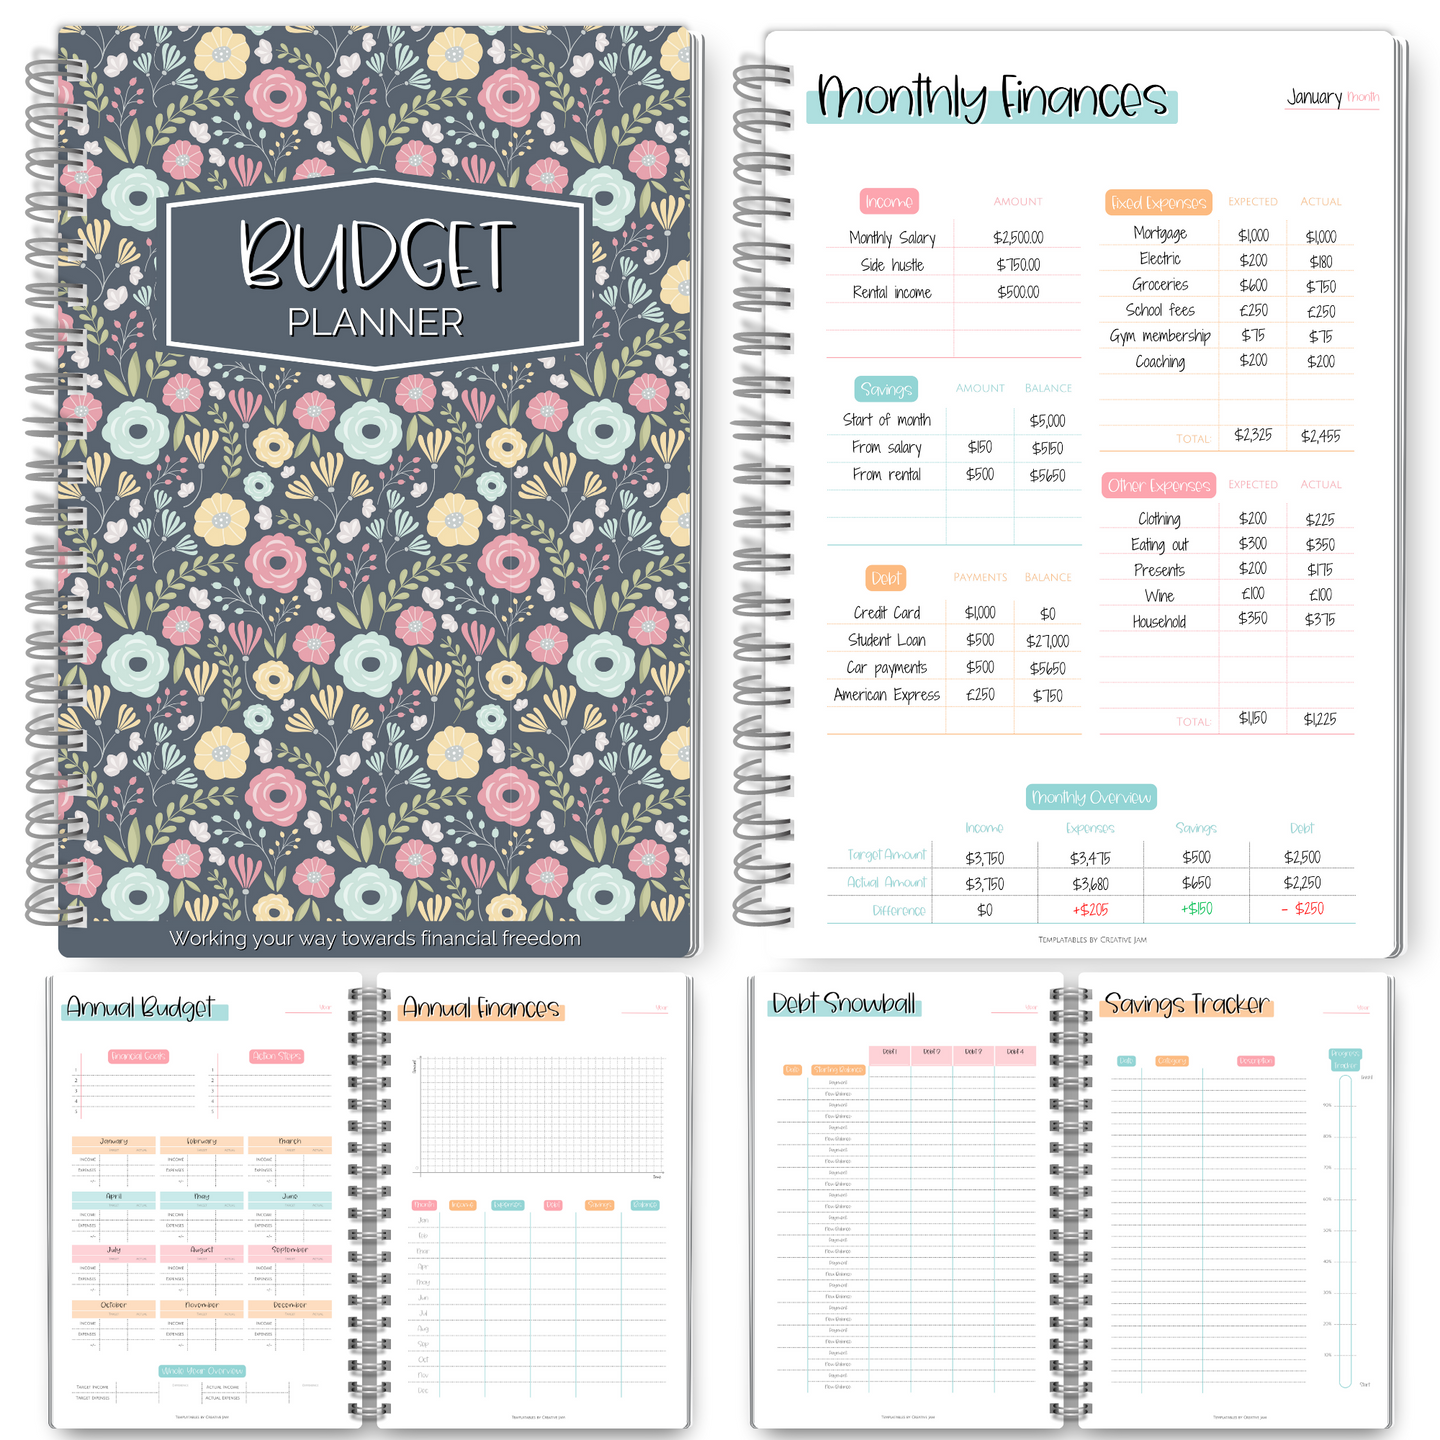 Budget Planner & Monthly Bill Organizer | Finance Budget Planner, Financial Savings, Debt, Income, Expenses, Spending & Bill Trackers | Colorful Sky